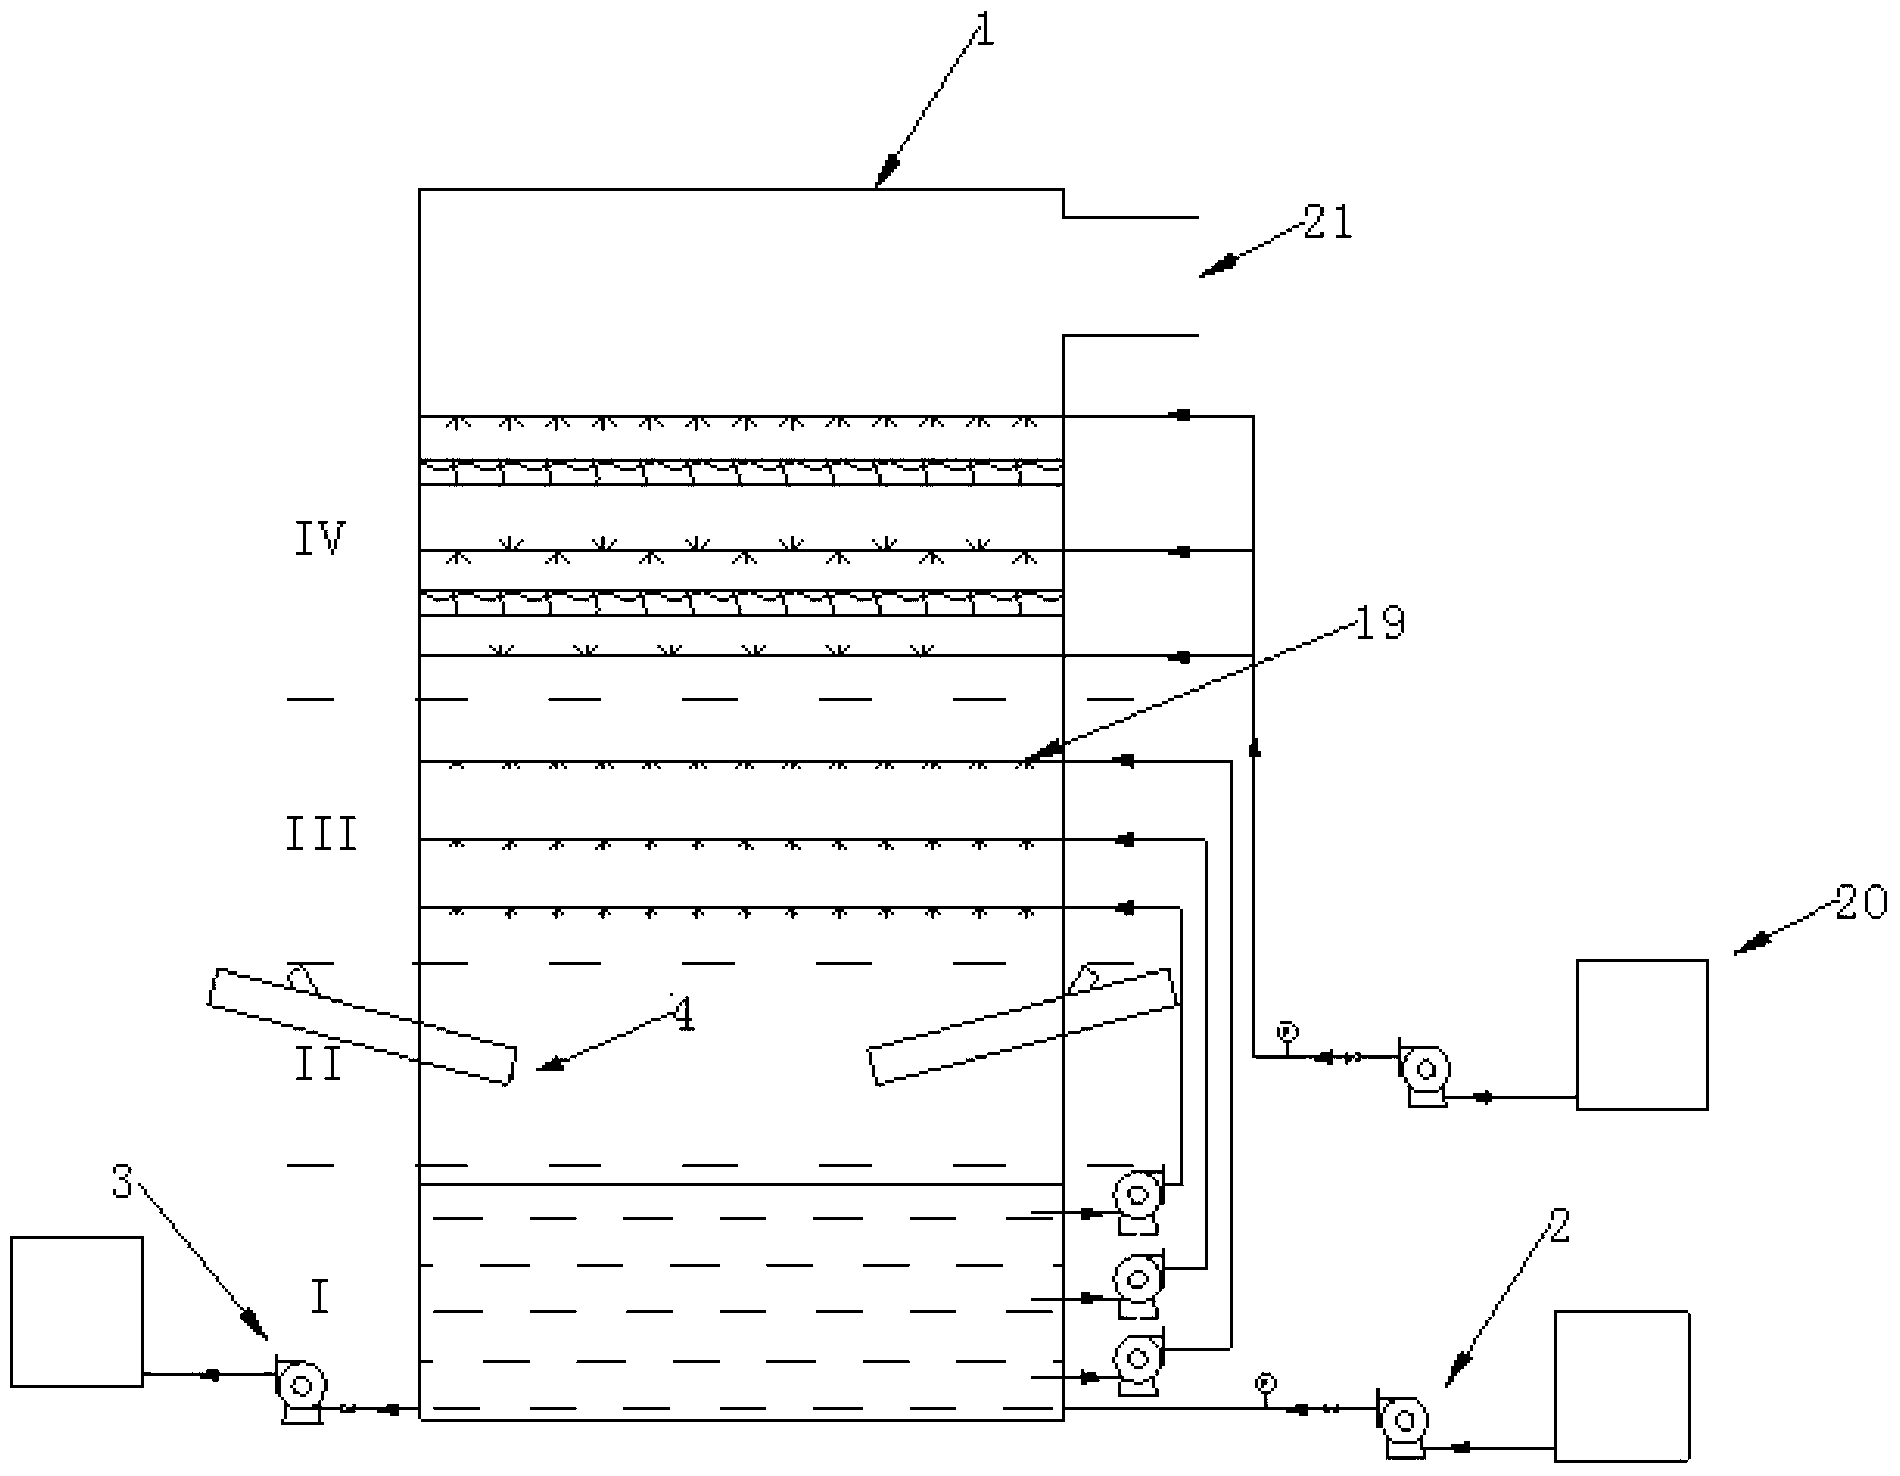 Desulfurization and denitrification device based on adjusting type active particle exciters